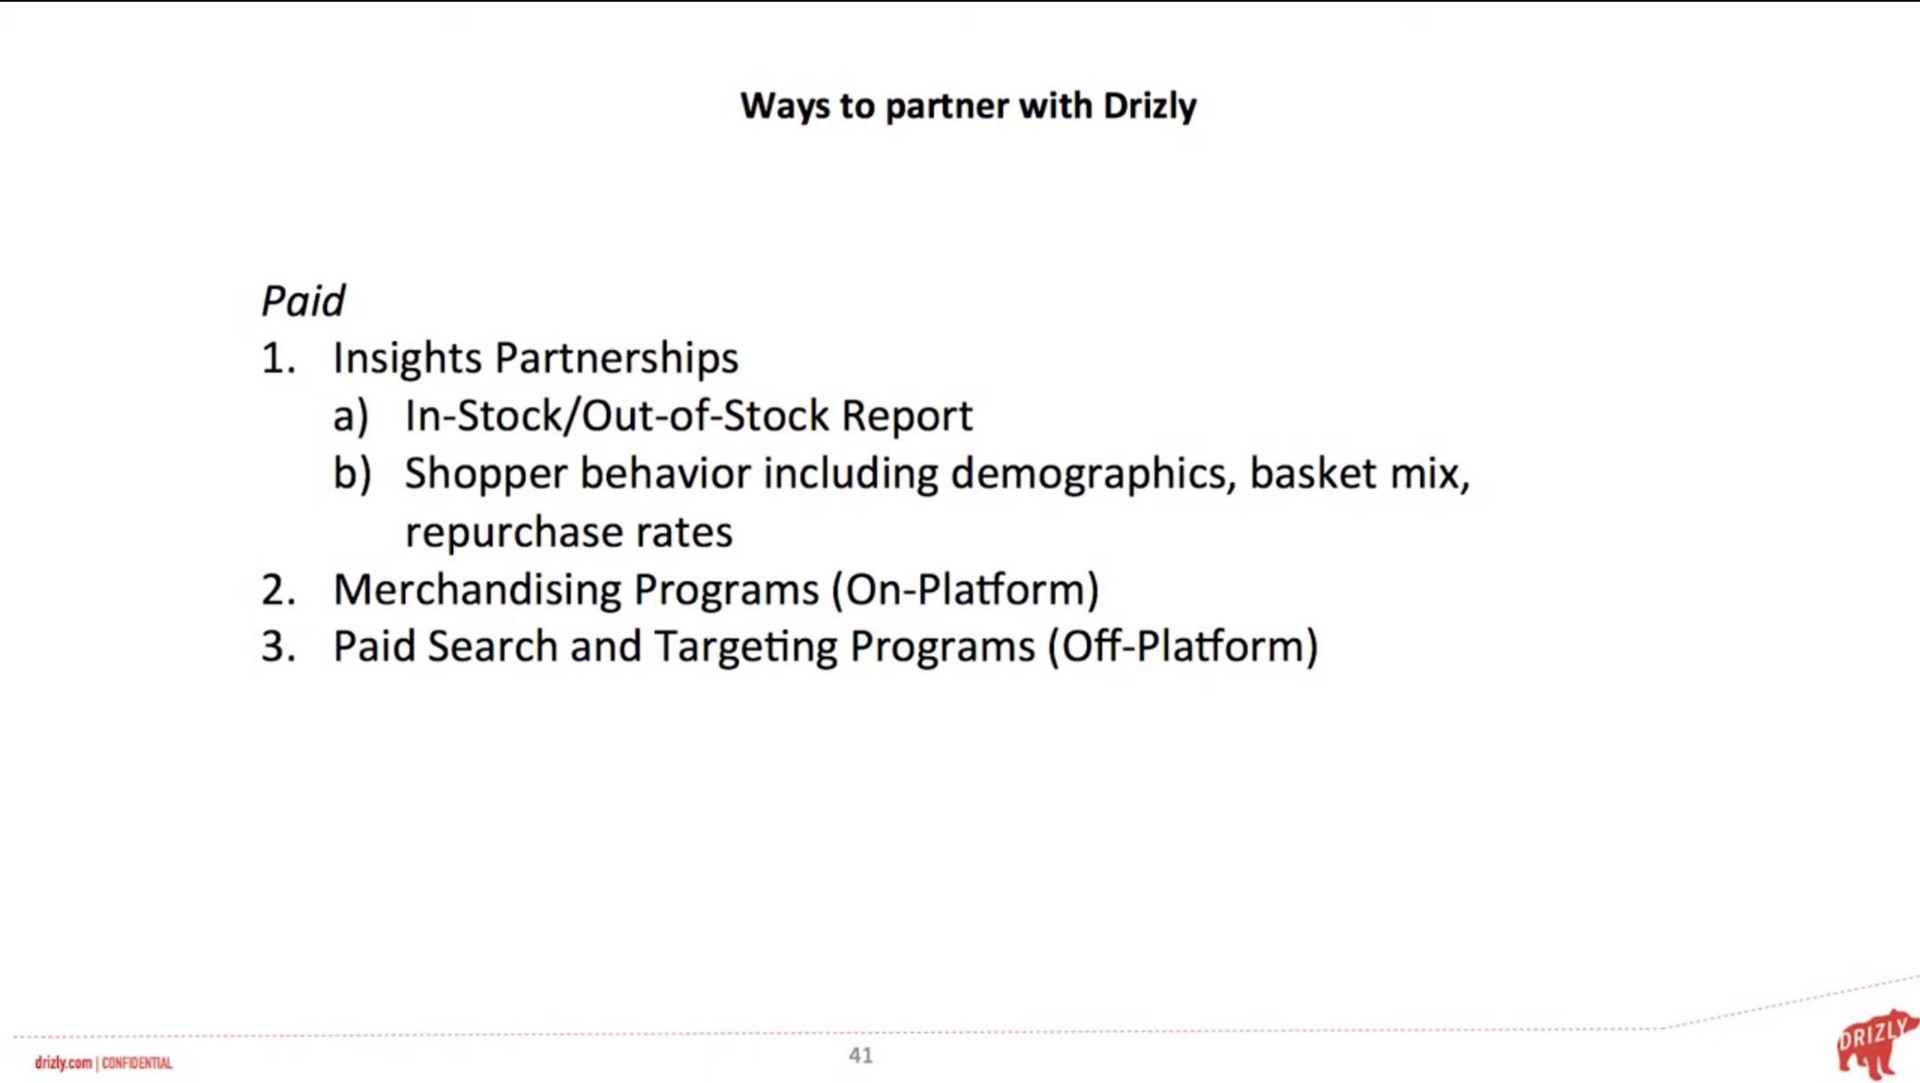 ways to partner with paid insights partnerships a shopper behavior including demographics basket mix in stock out of stock report repurchase rates merchandising programs on platform paid search and targeting programs off platform | Drizly